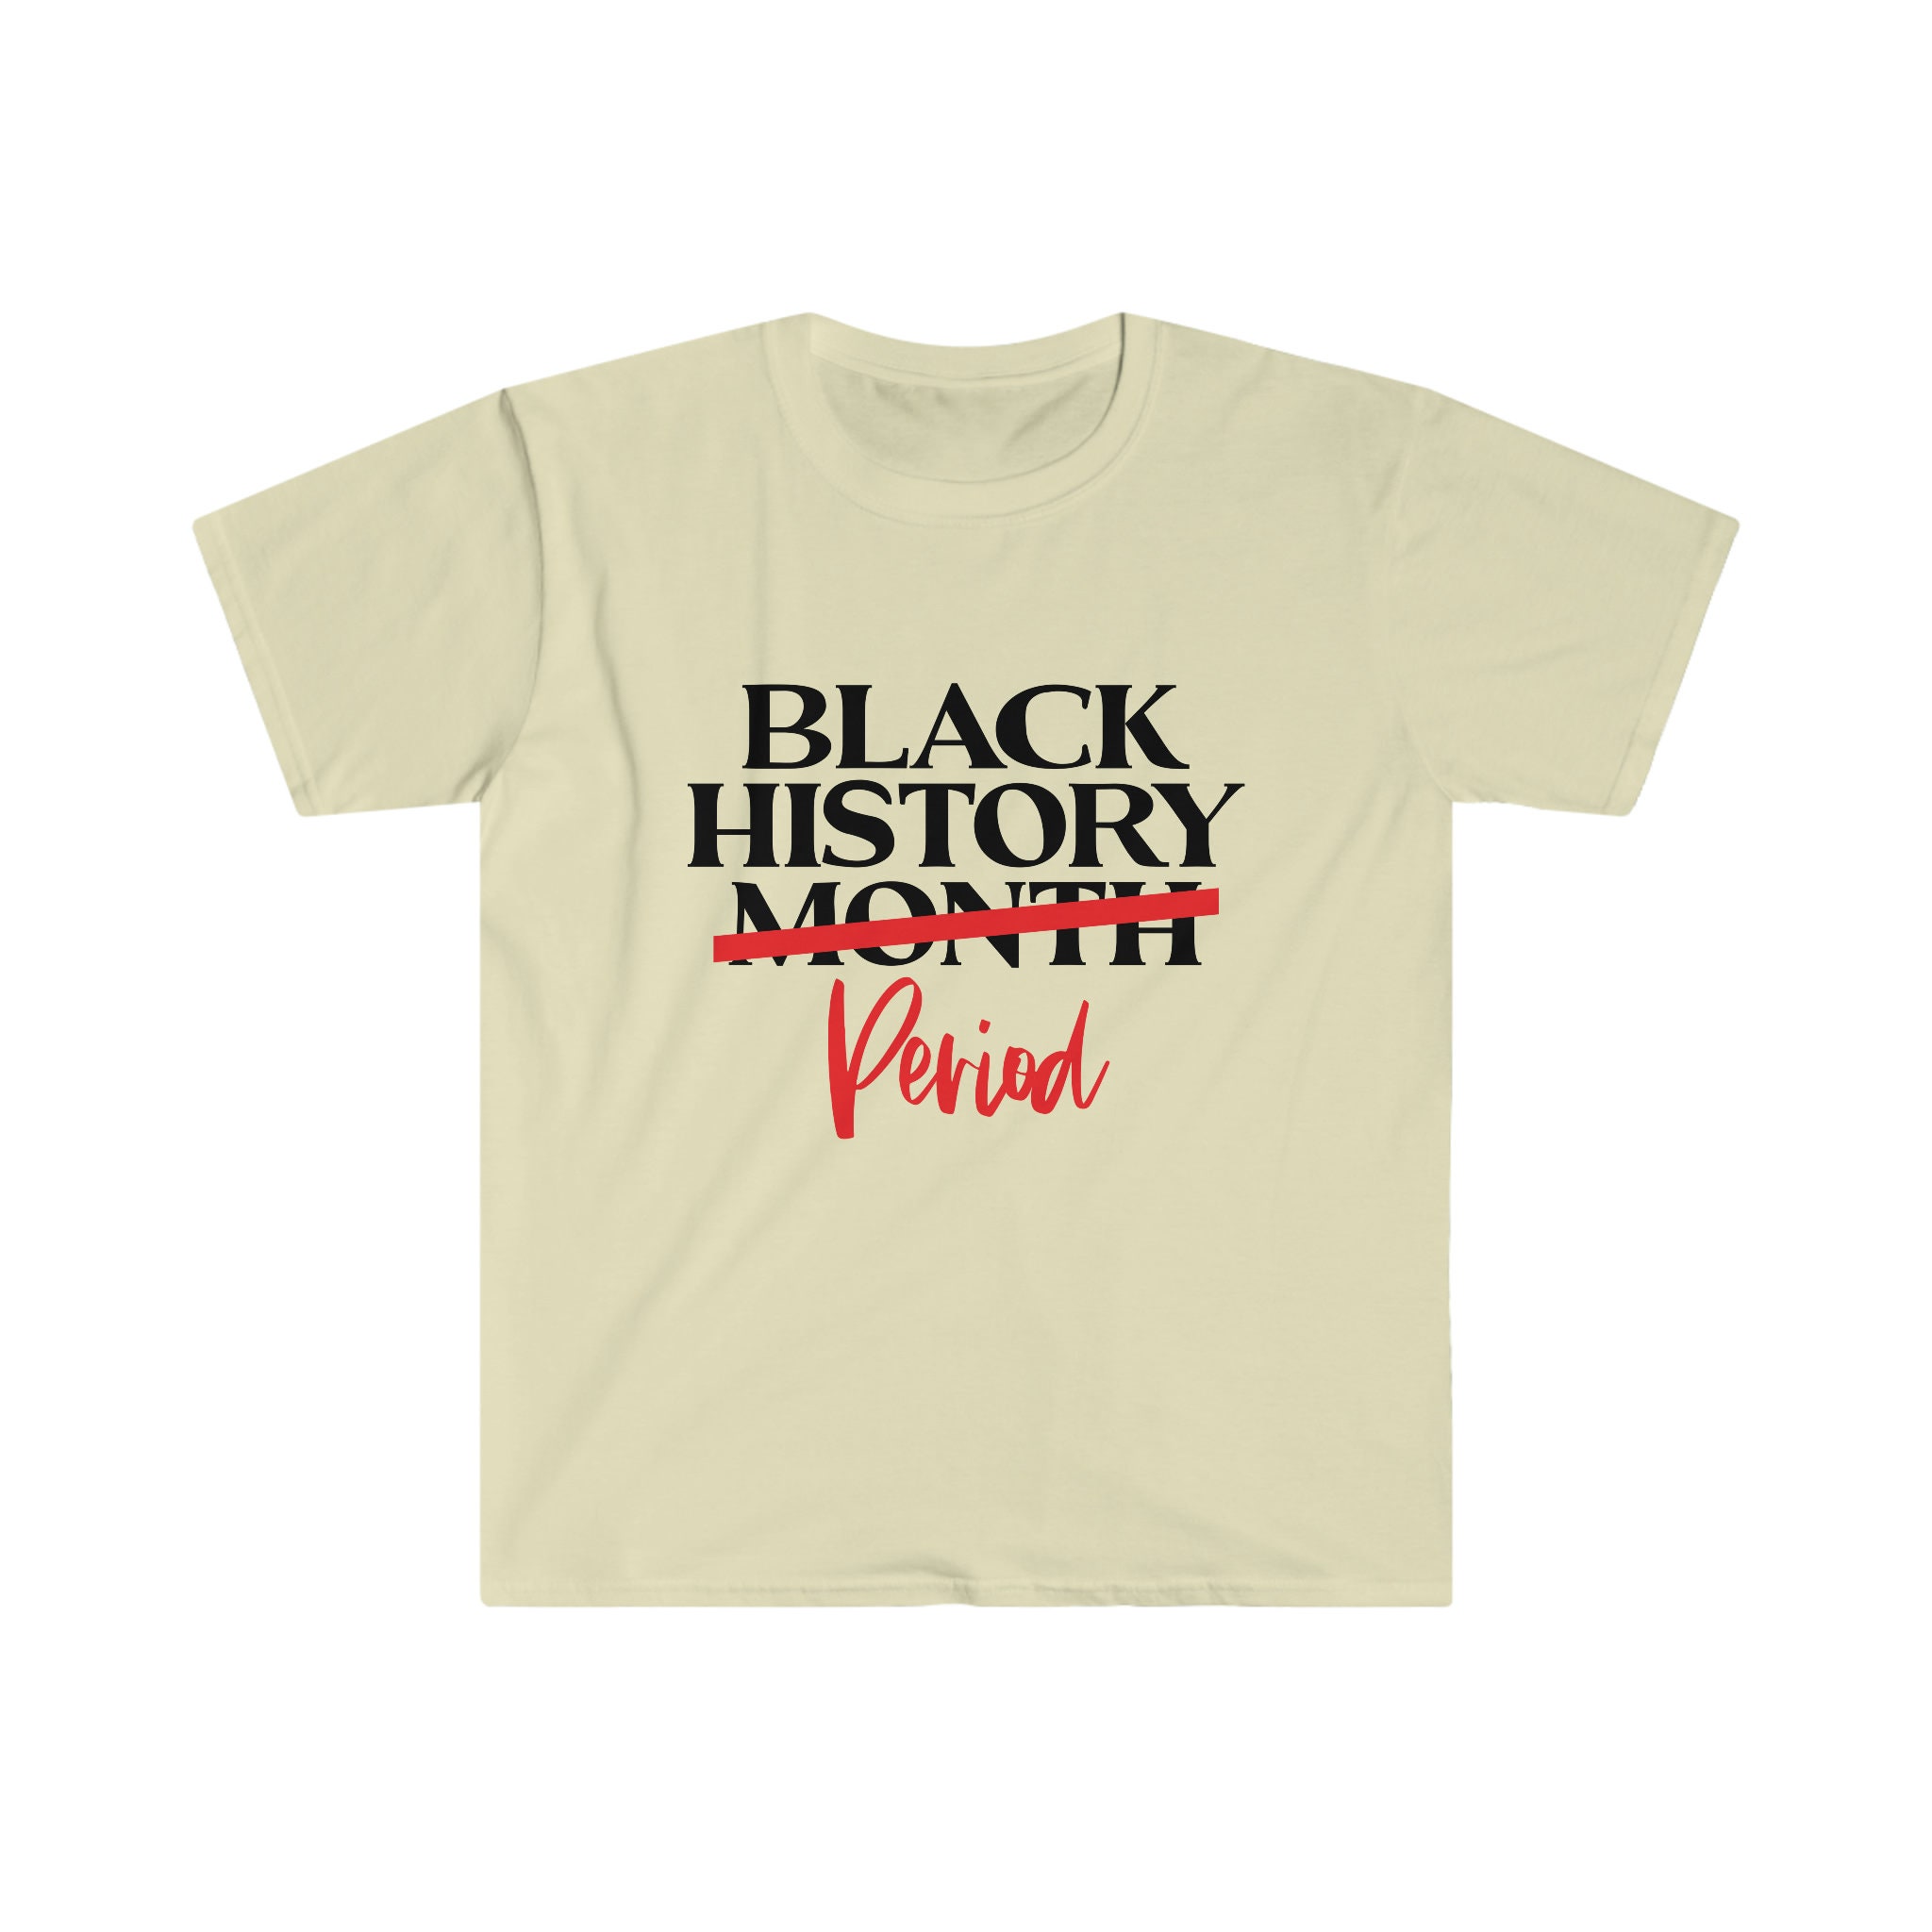 Discover Black History Month Period, Celebrate Black History Month T-Shirt